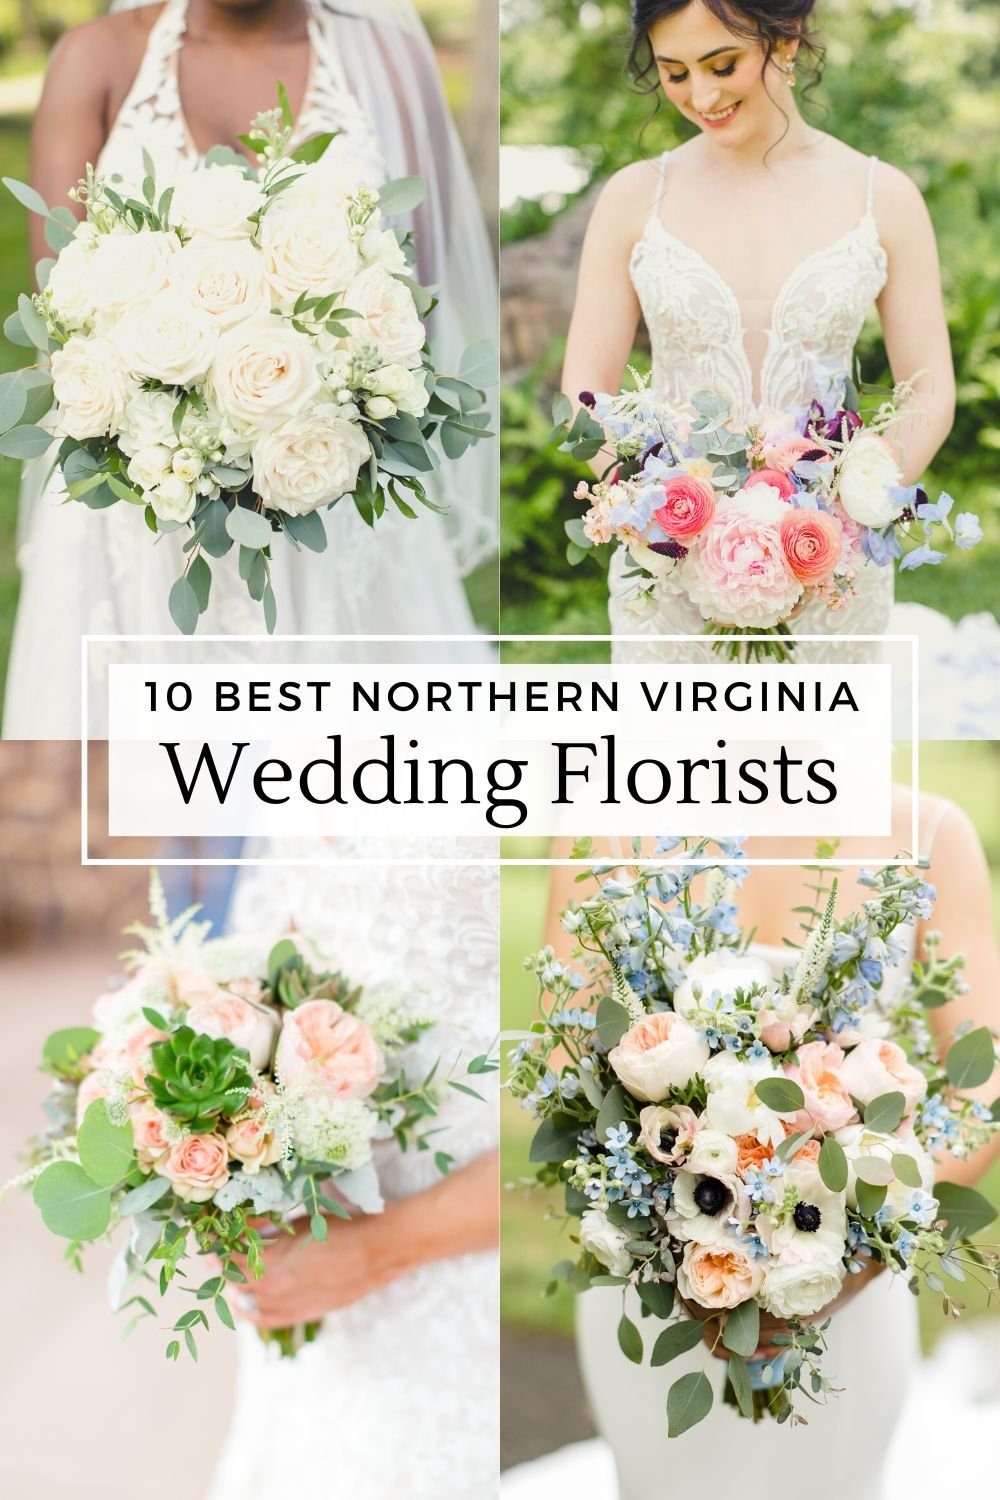 Best wedding florists in DC and Northern Virginia